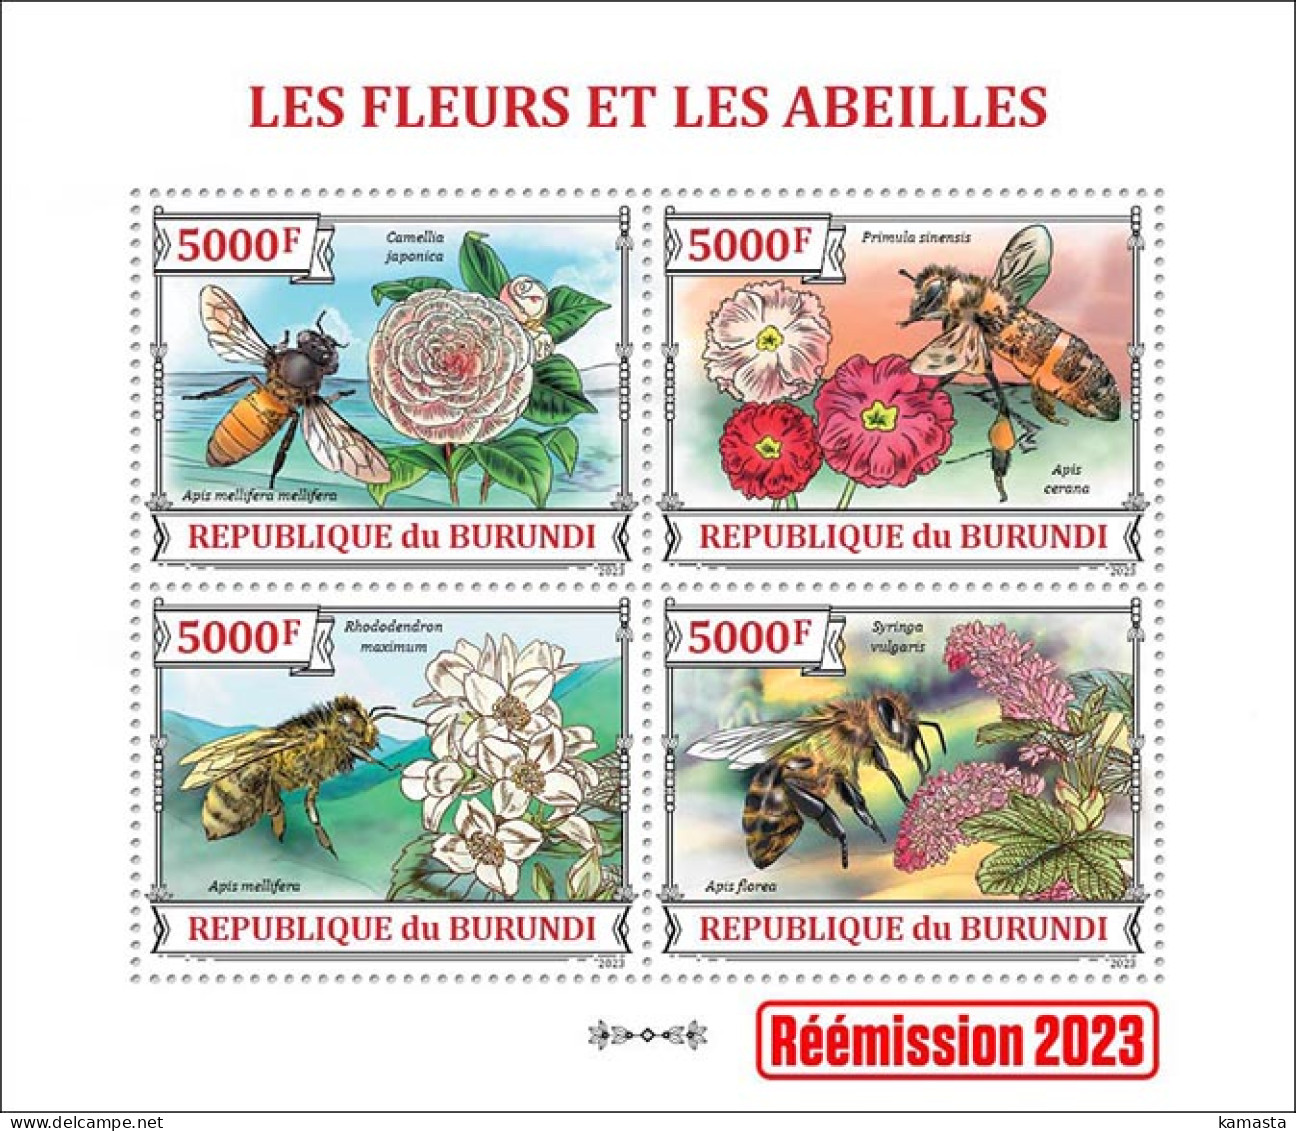 Burundi 2023 Flowers And Bees. (220) OFFICIAL ISSUE - Honeybees